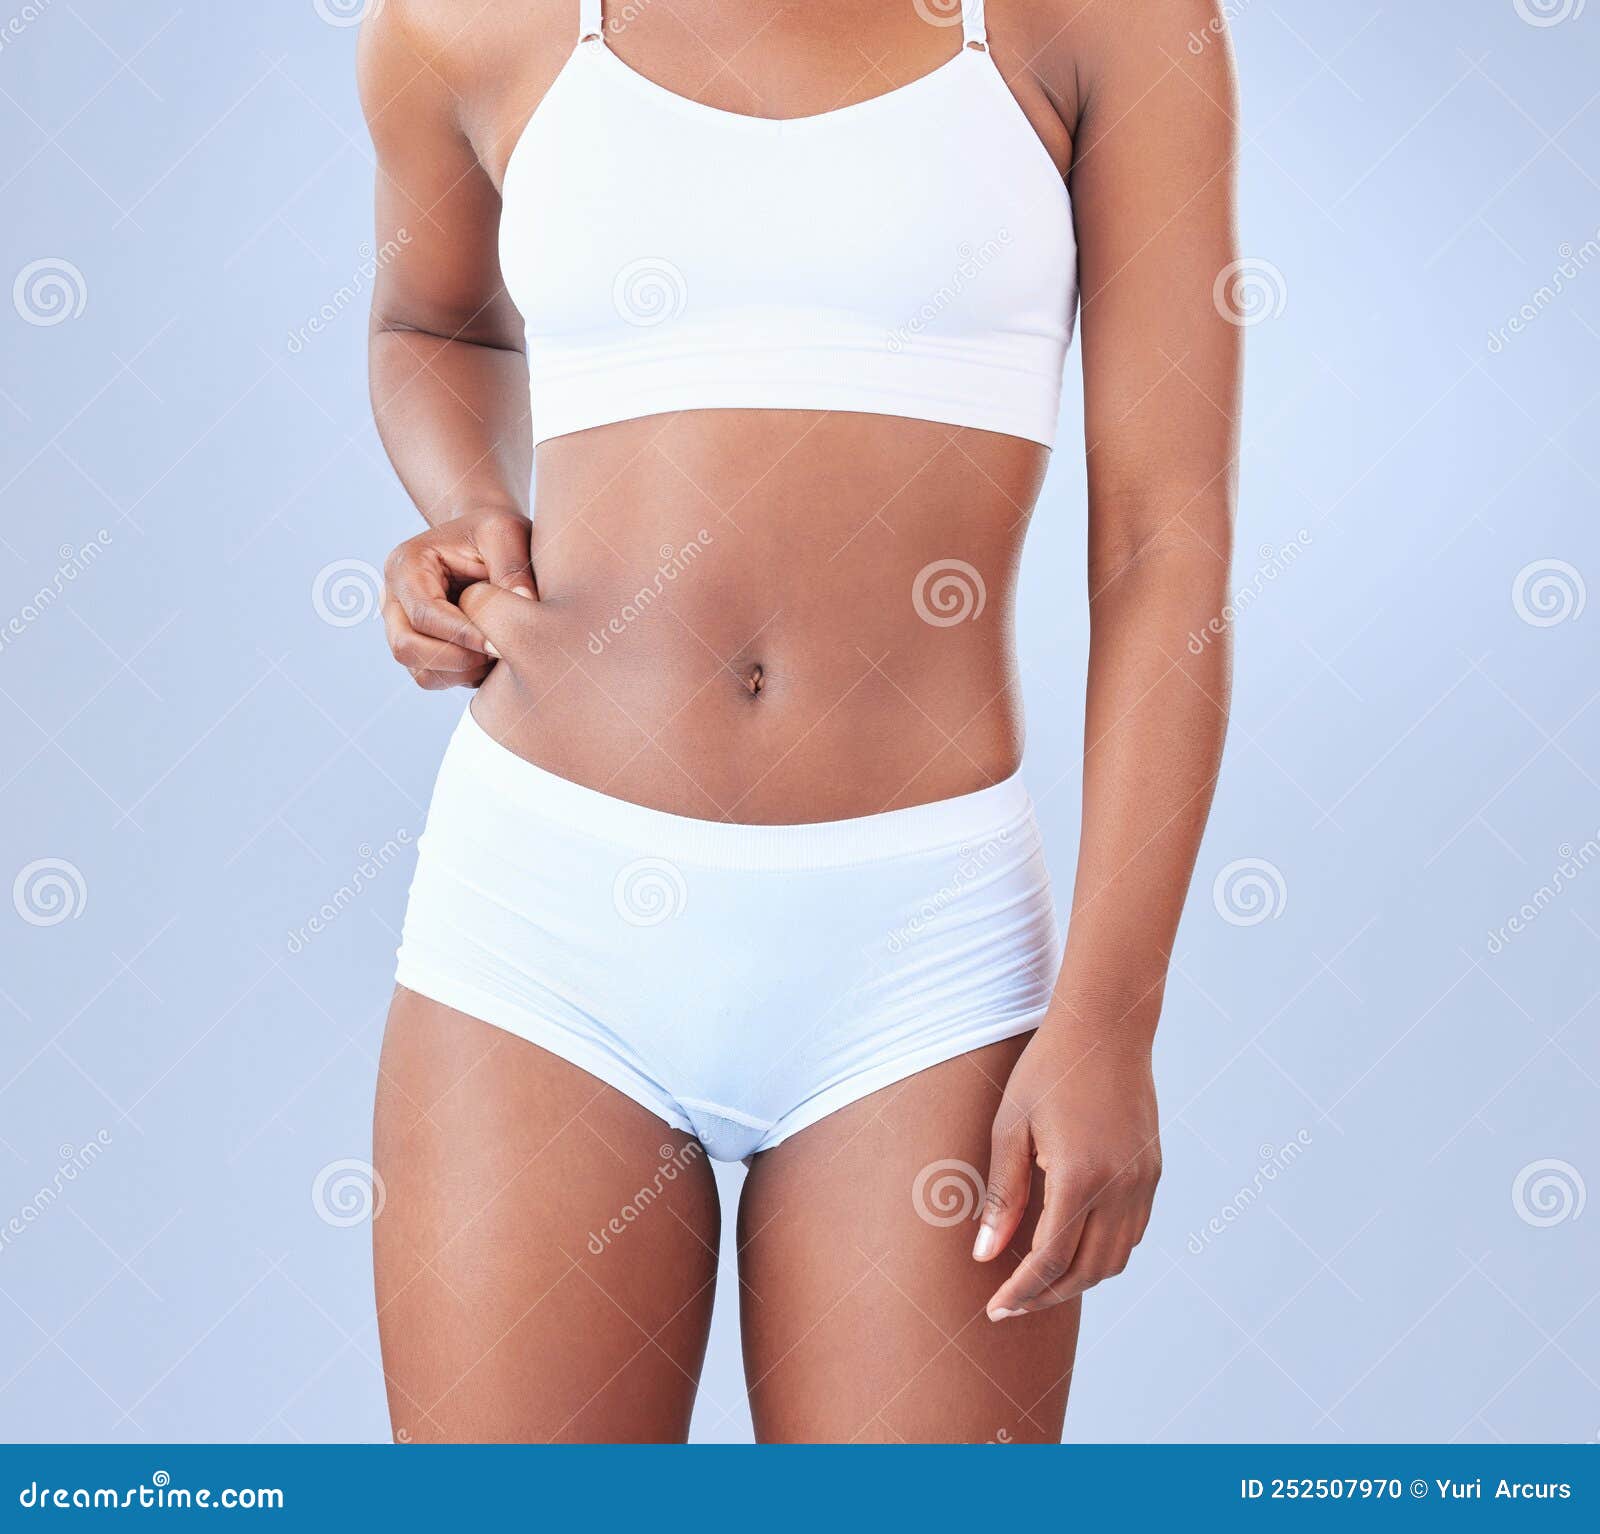 Women Lifting And Pulling Her Elastic Panties On A White Background Stock  Photo, Picture and Royalty Free Image. Image 69109218.